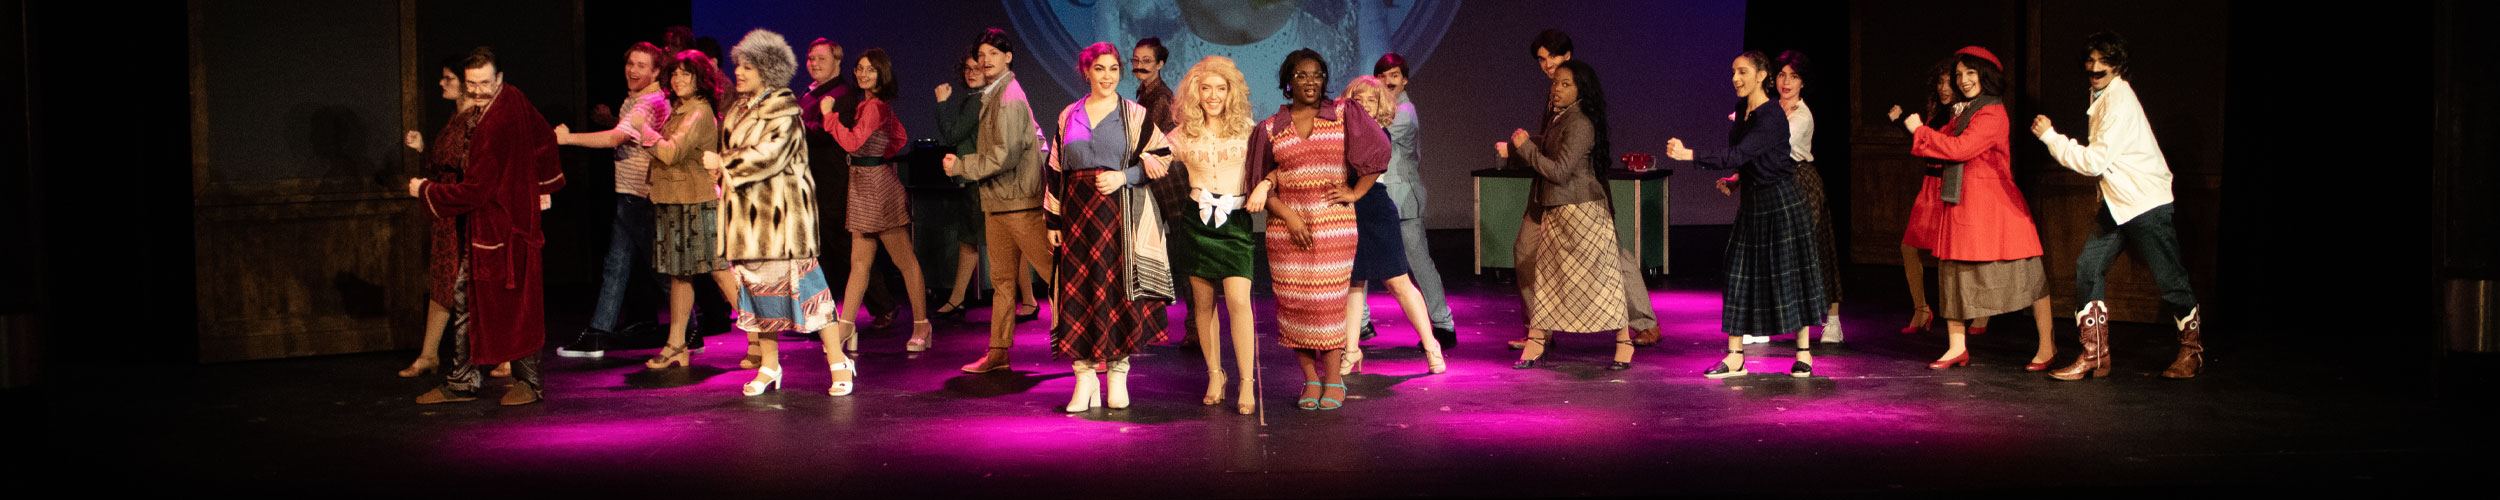 Musical Theater Students 9 to 5 show